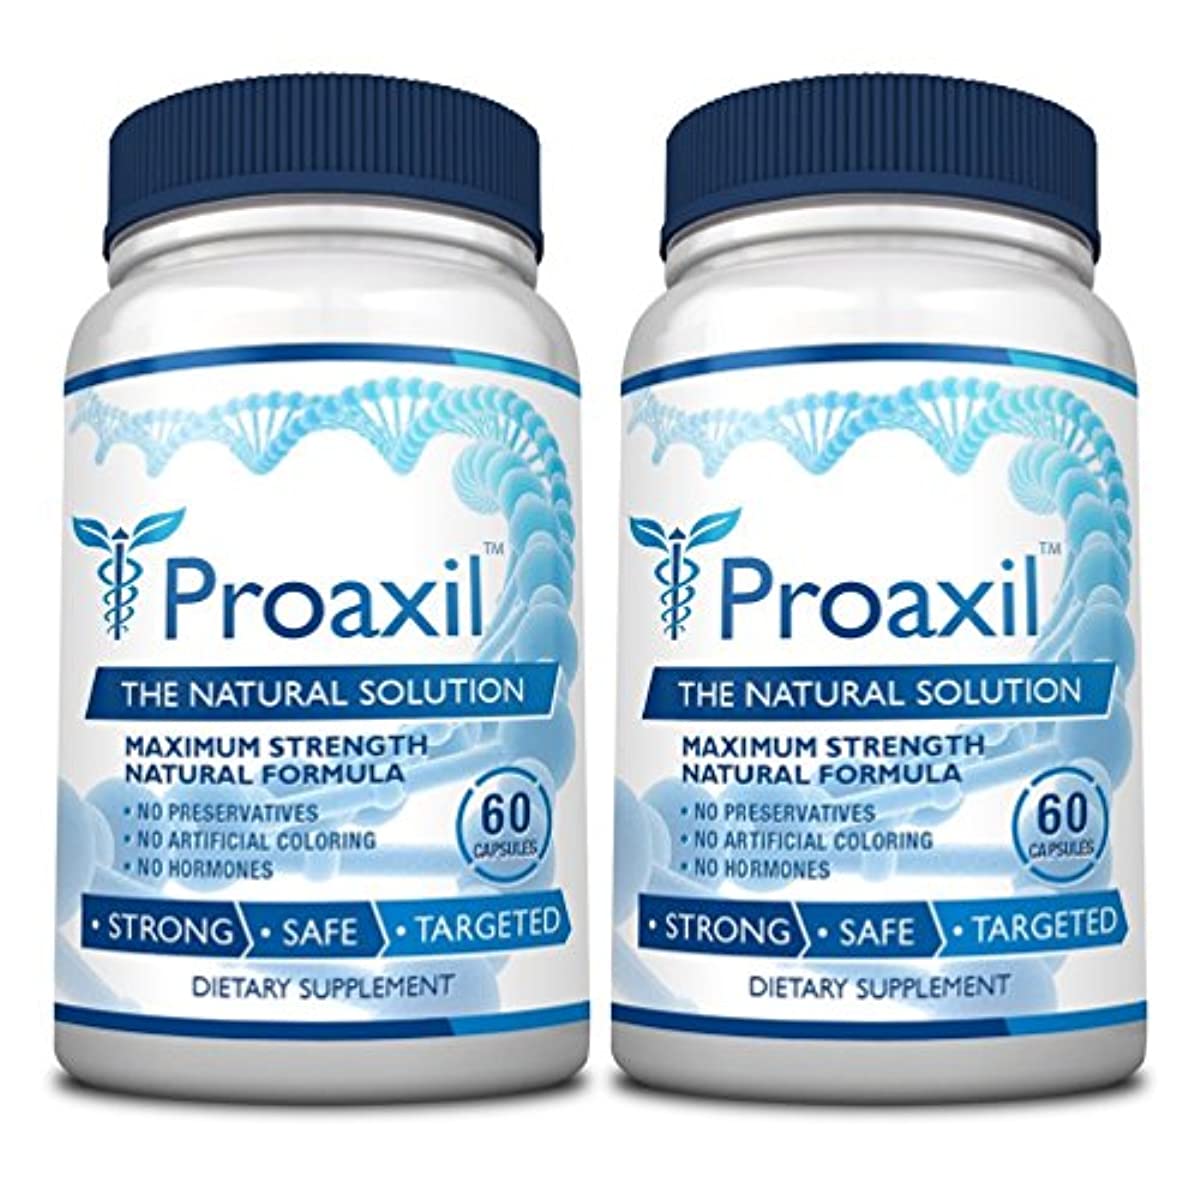 Proaxil 1 Choice for Prostate Health